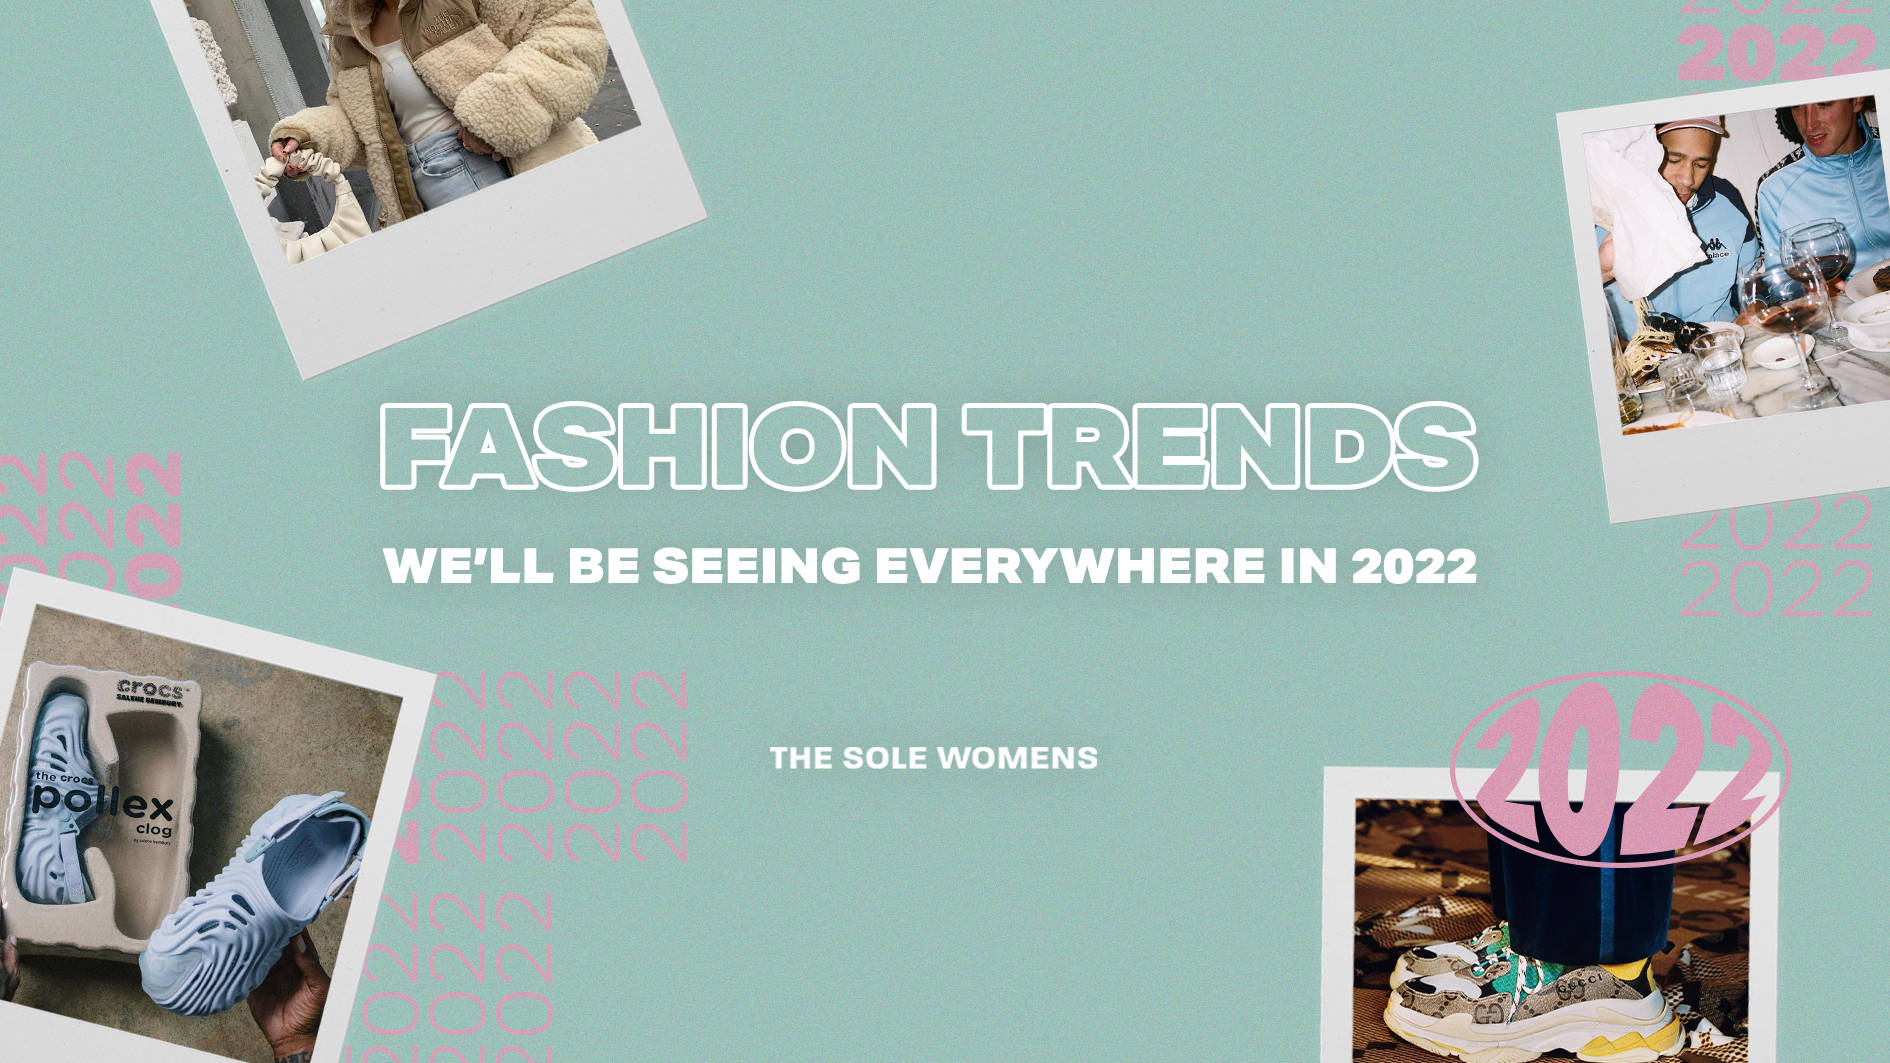 The Latest Women's Fashion Trends That Are Everywhere in 2022